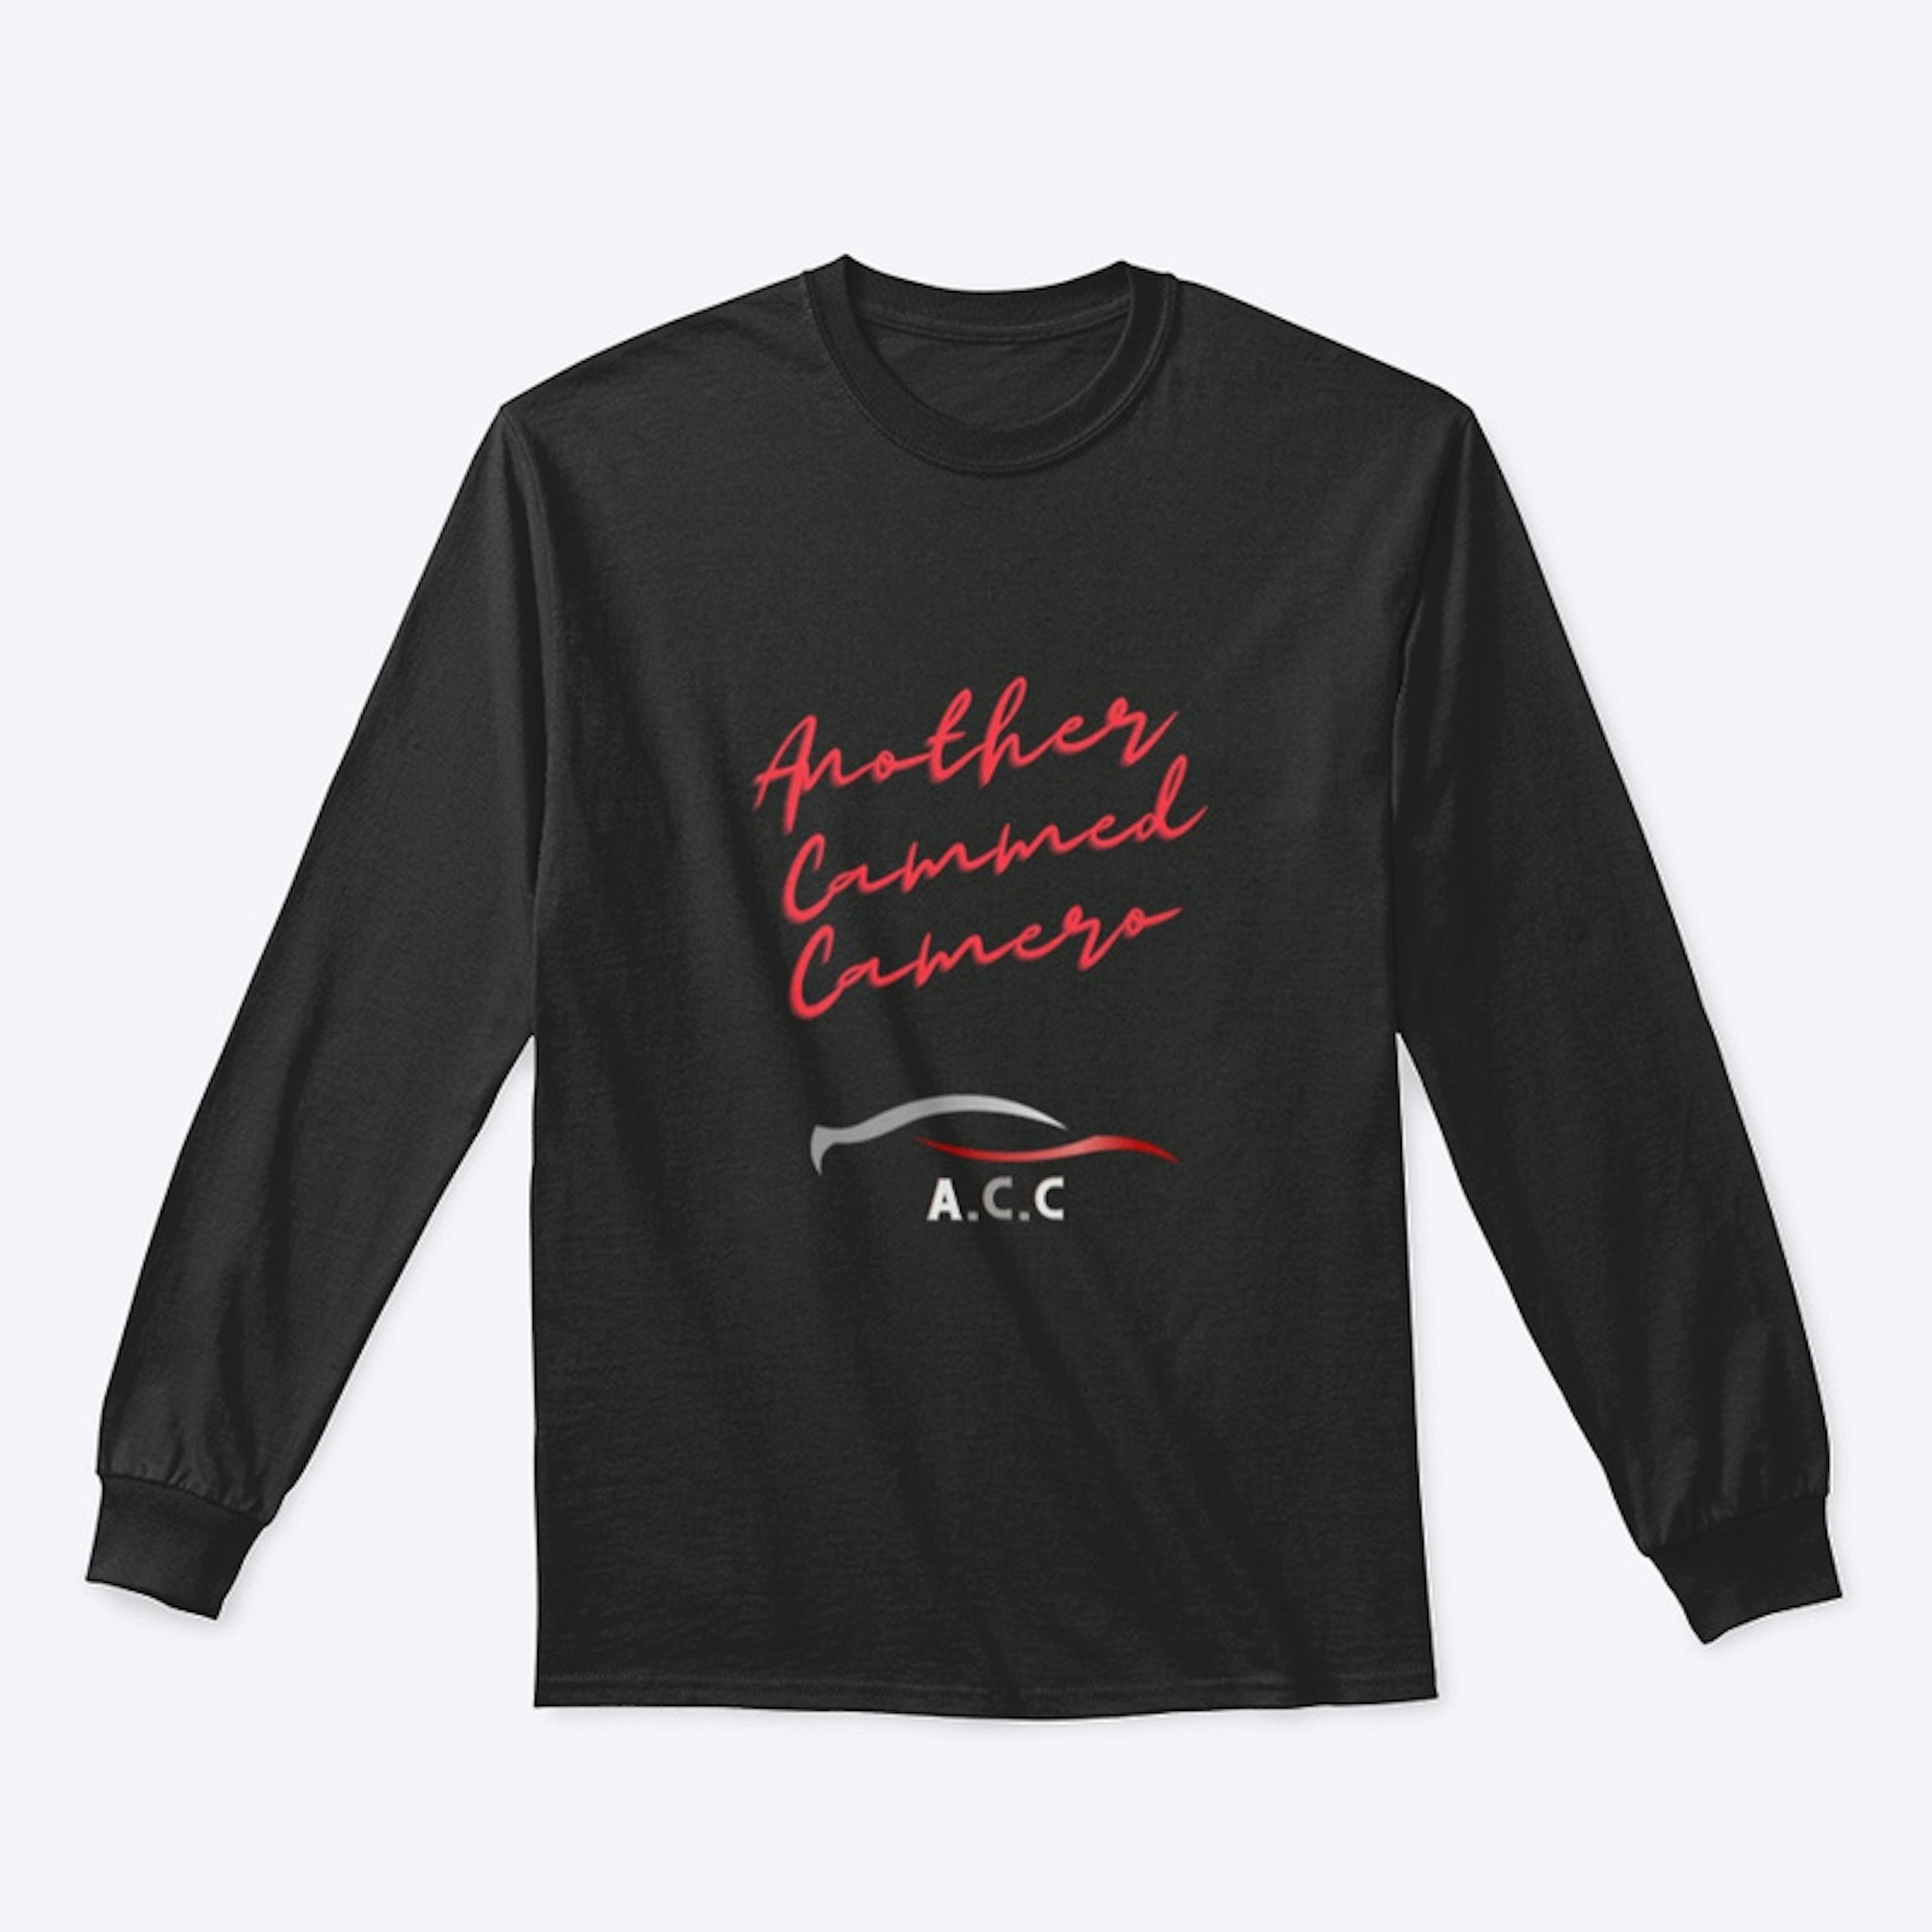 ACC. ANOTHER CAMMED CAMERO 